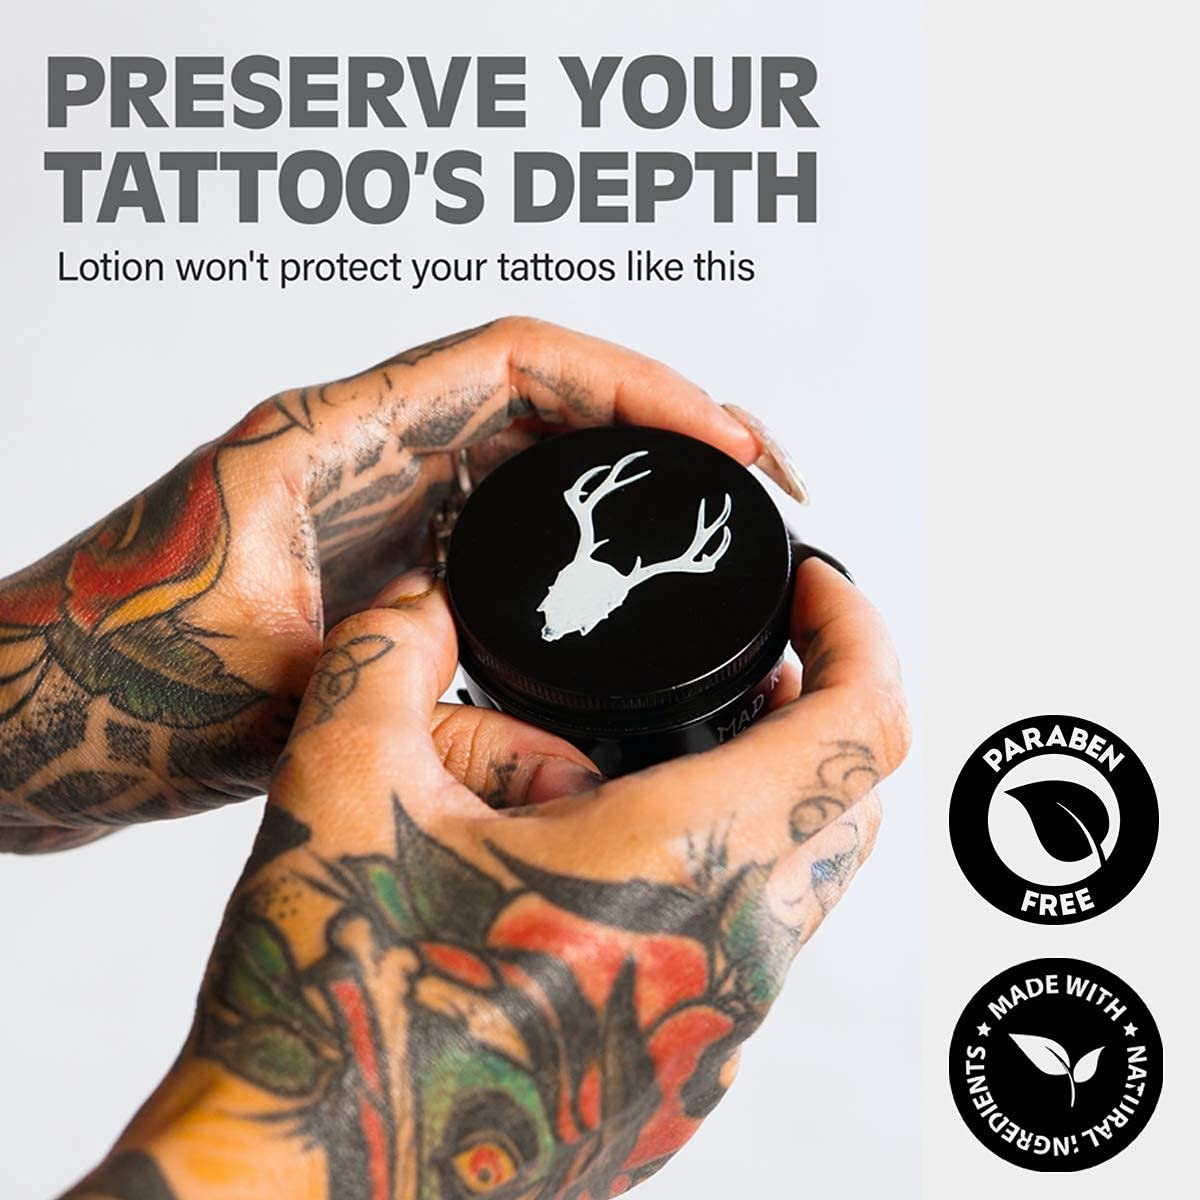 Mad Rabbit Tattoo Balm & Aftercare Cream- Color Enhancement that Revives Old Tattoos, Hydrates New Tattoos, Made With Natural Ingredients + Petroleum Free, Daily Tattoo Lotion Moisturizer & Brightener